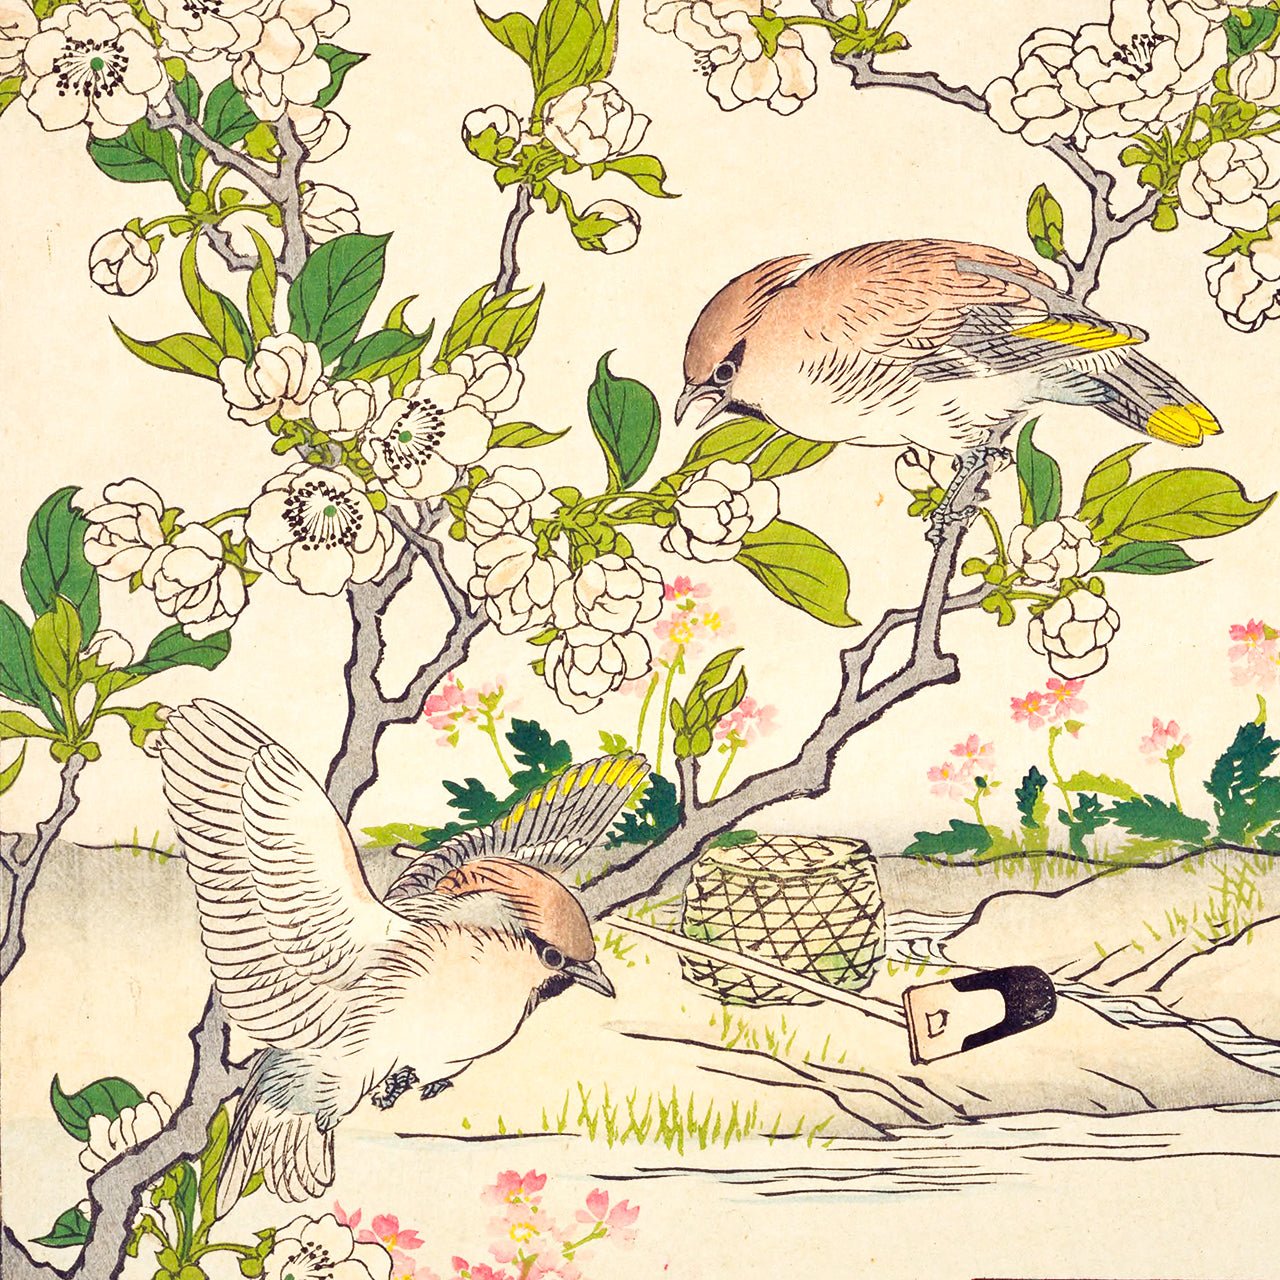 Pear Blossom and Cedar waxwing - Japonica Graphic